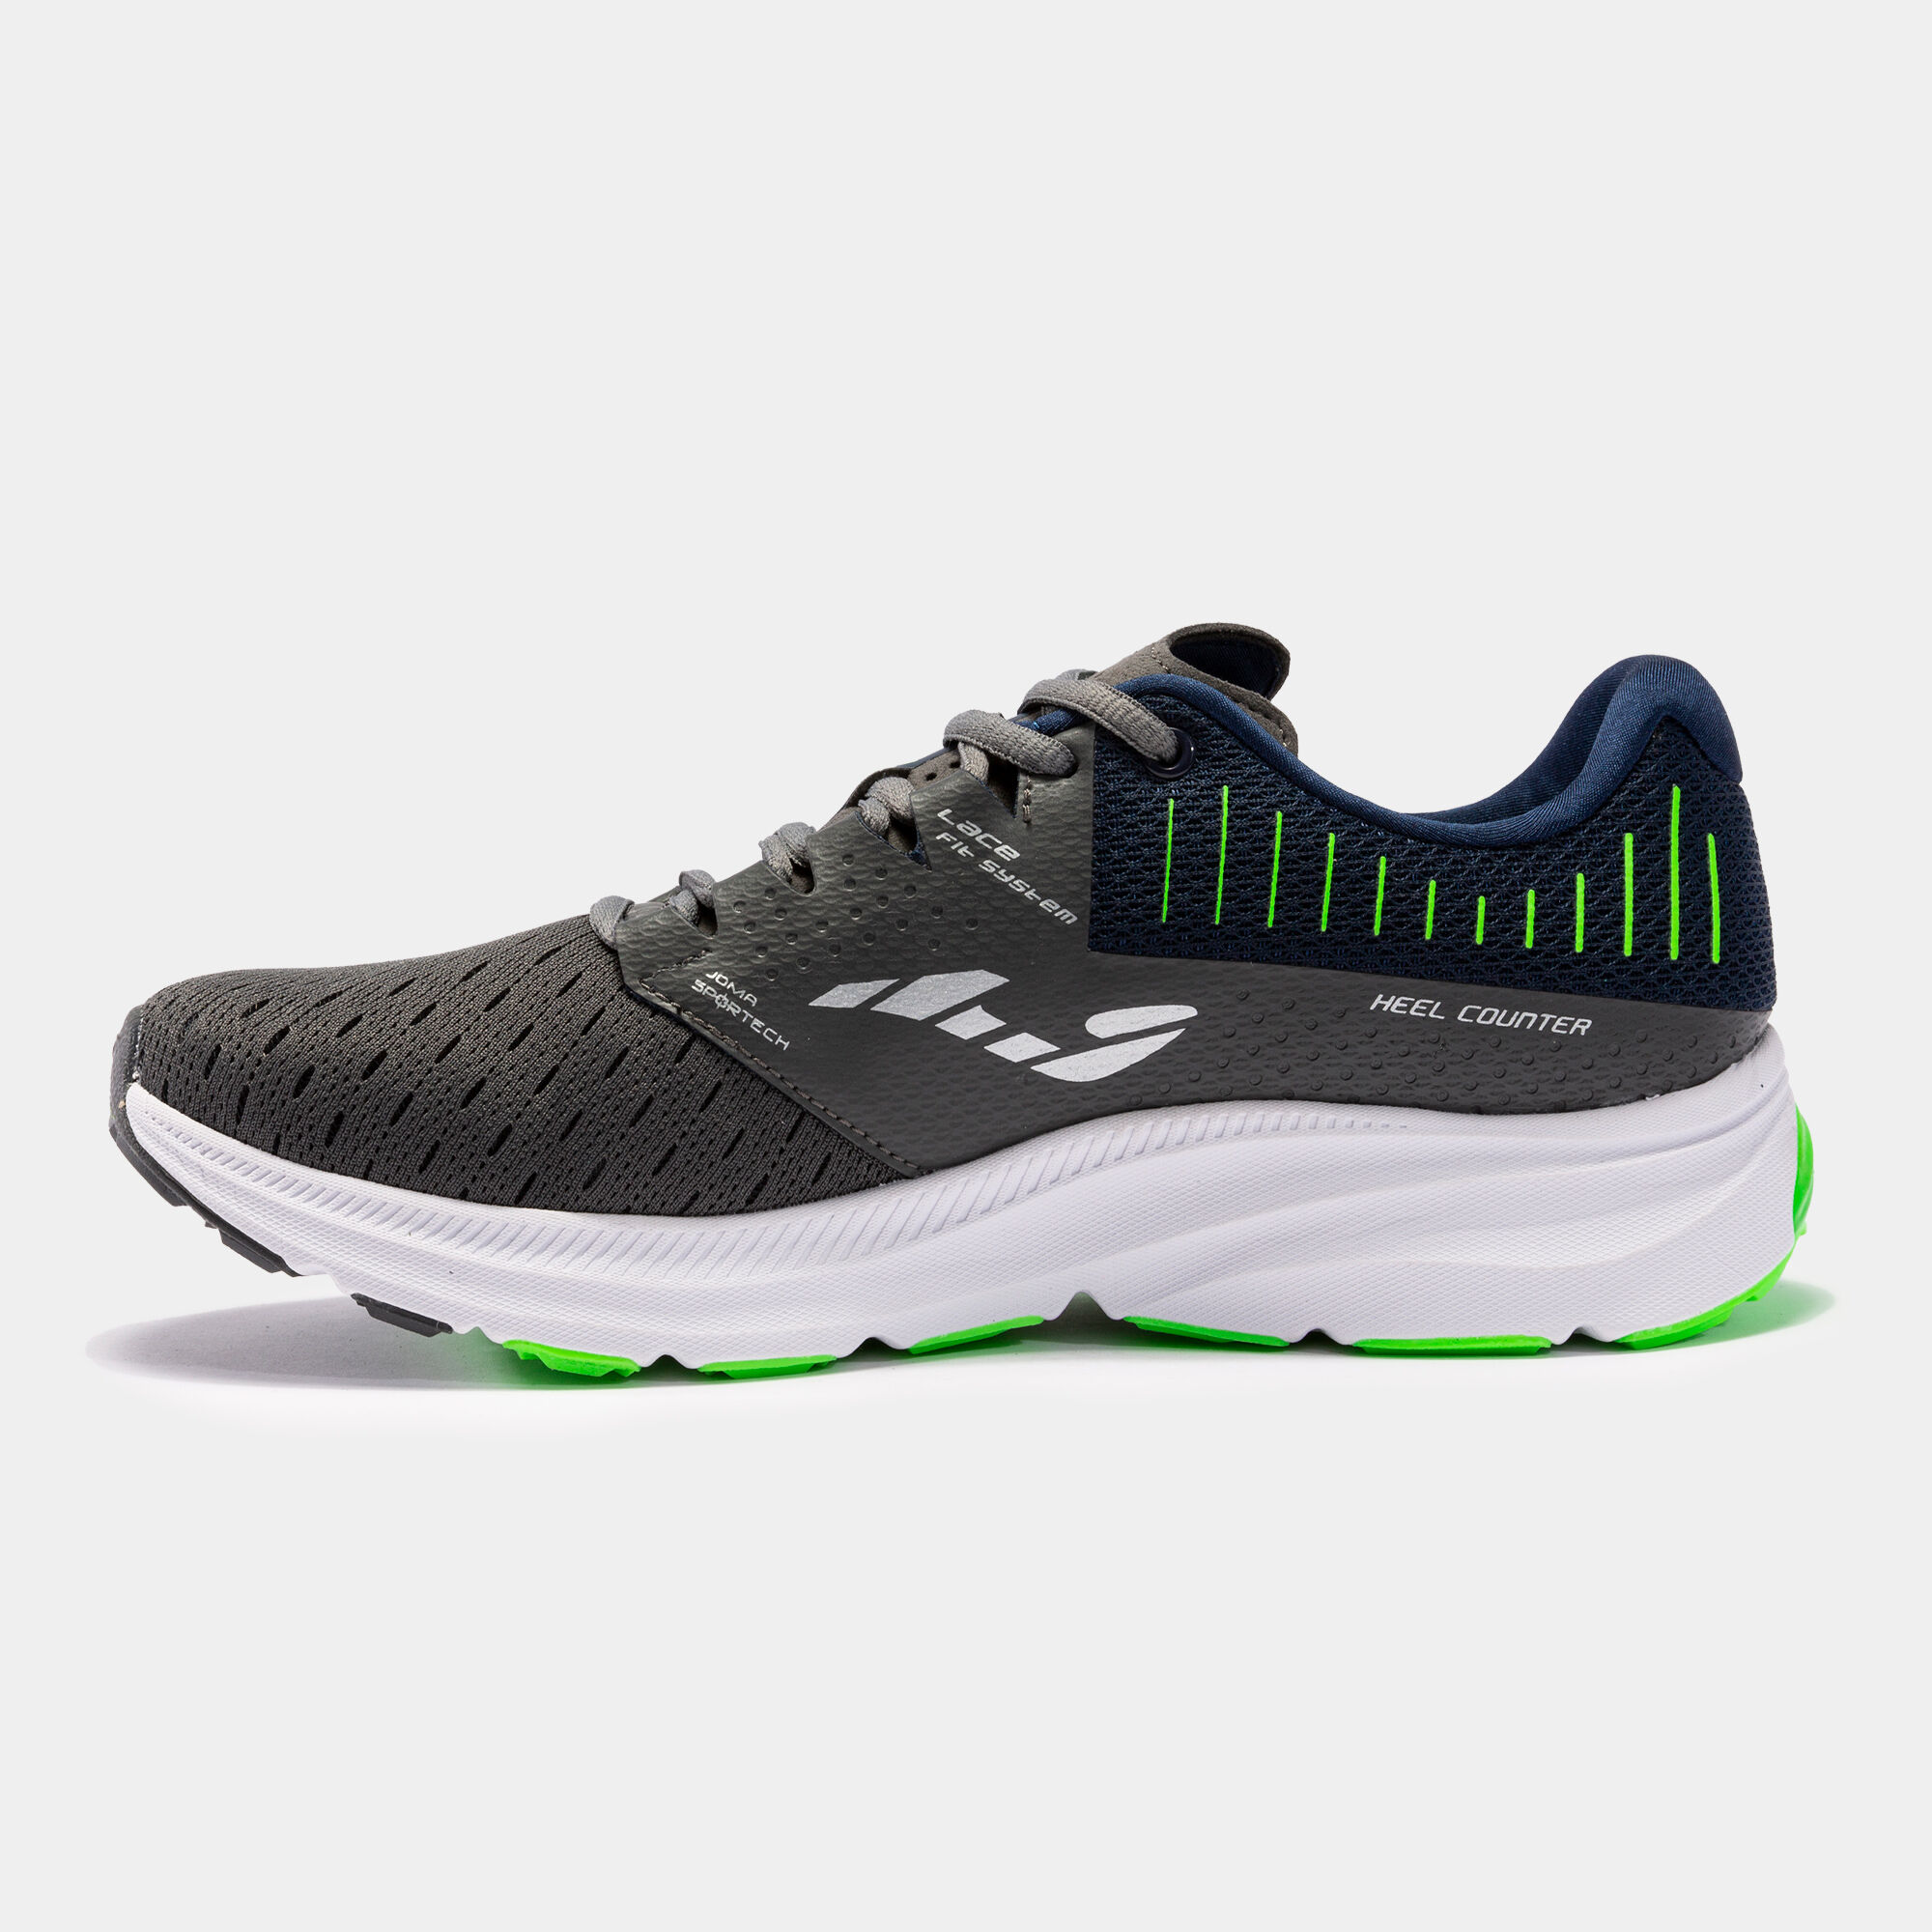 CHAUSSURES RUNNING VICTORY 22 HOMME GRIS VERT FLUO